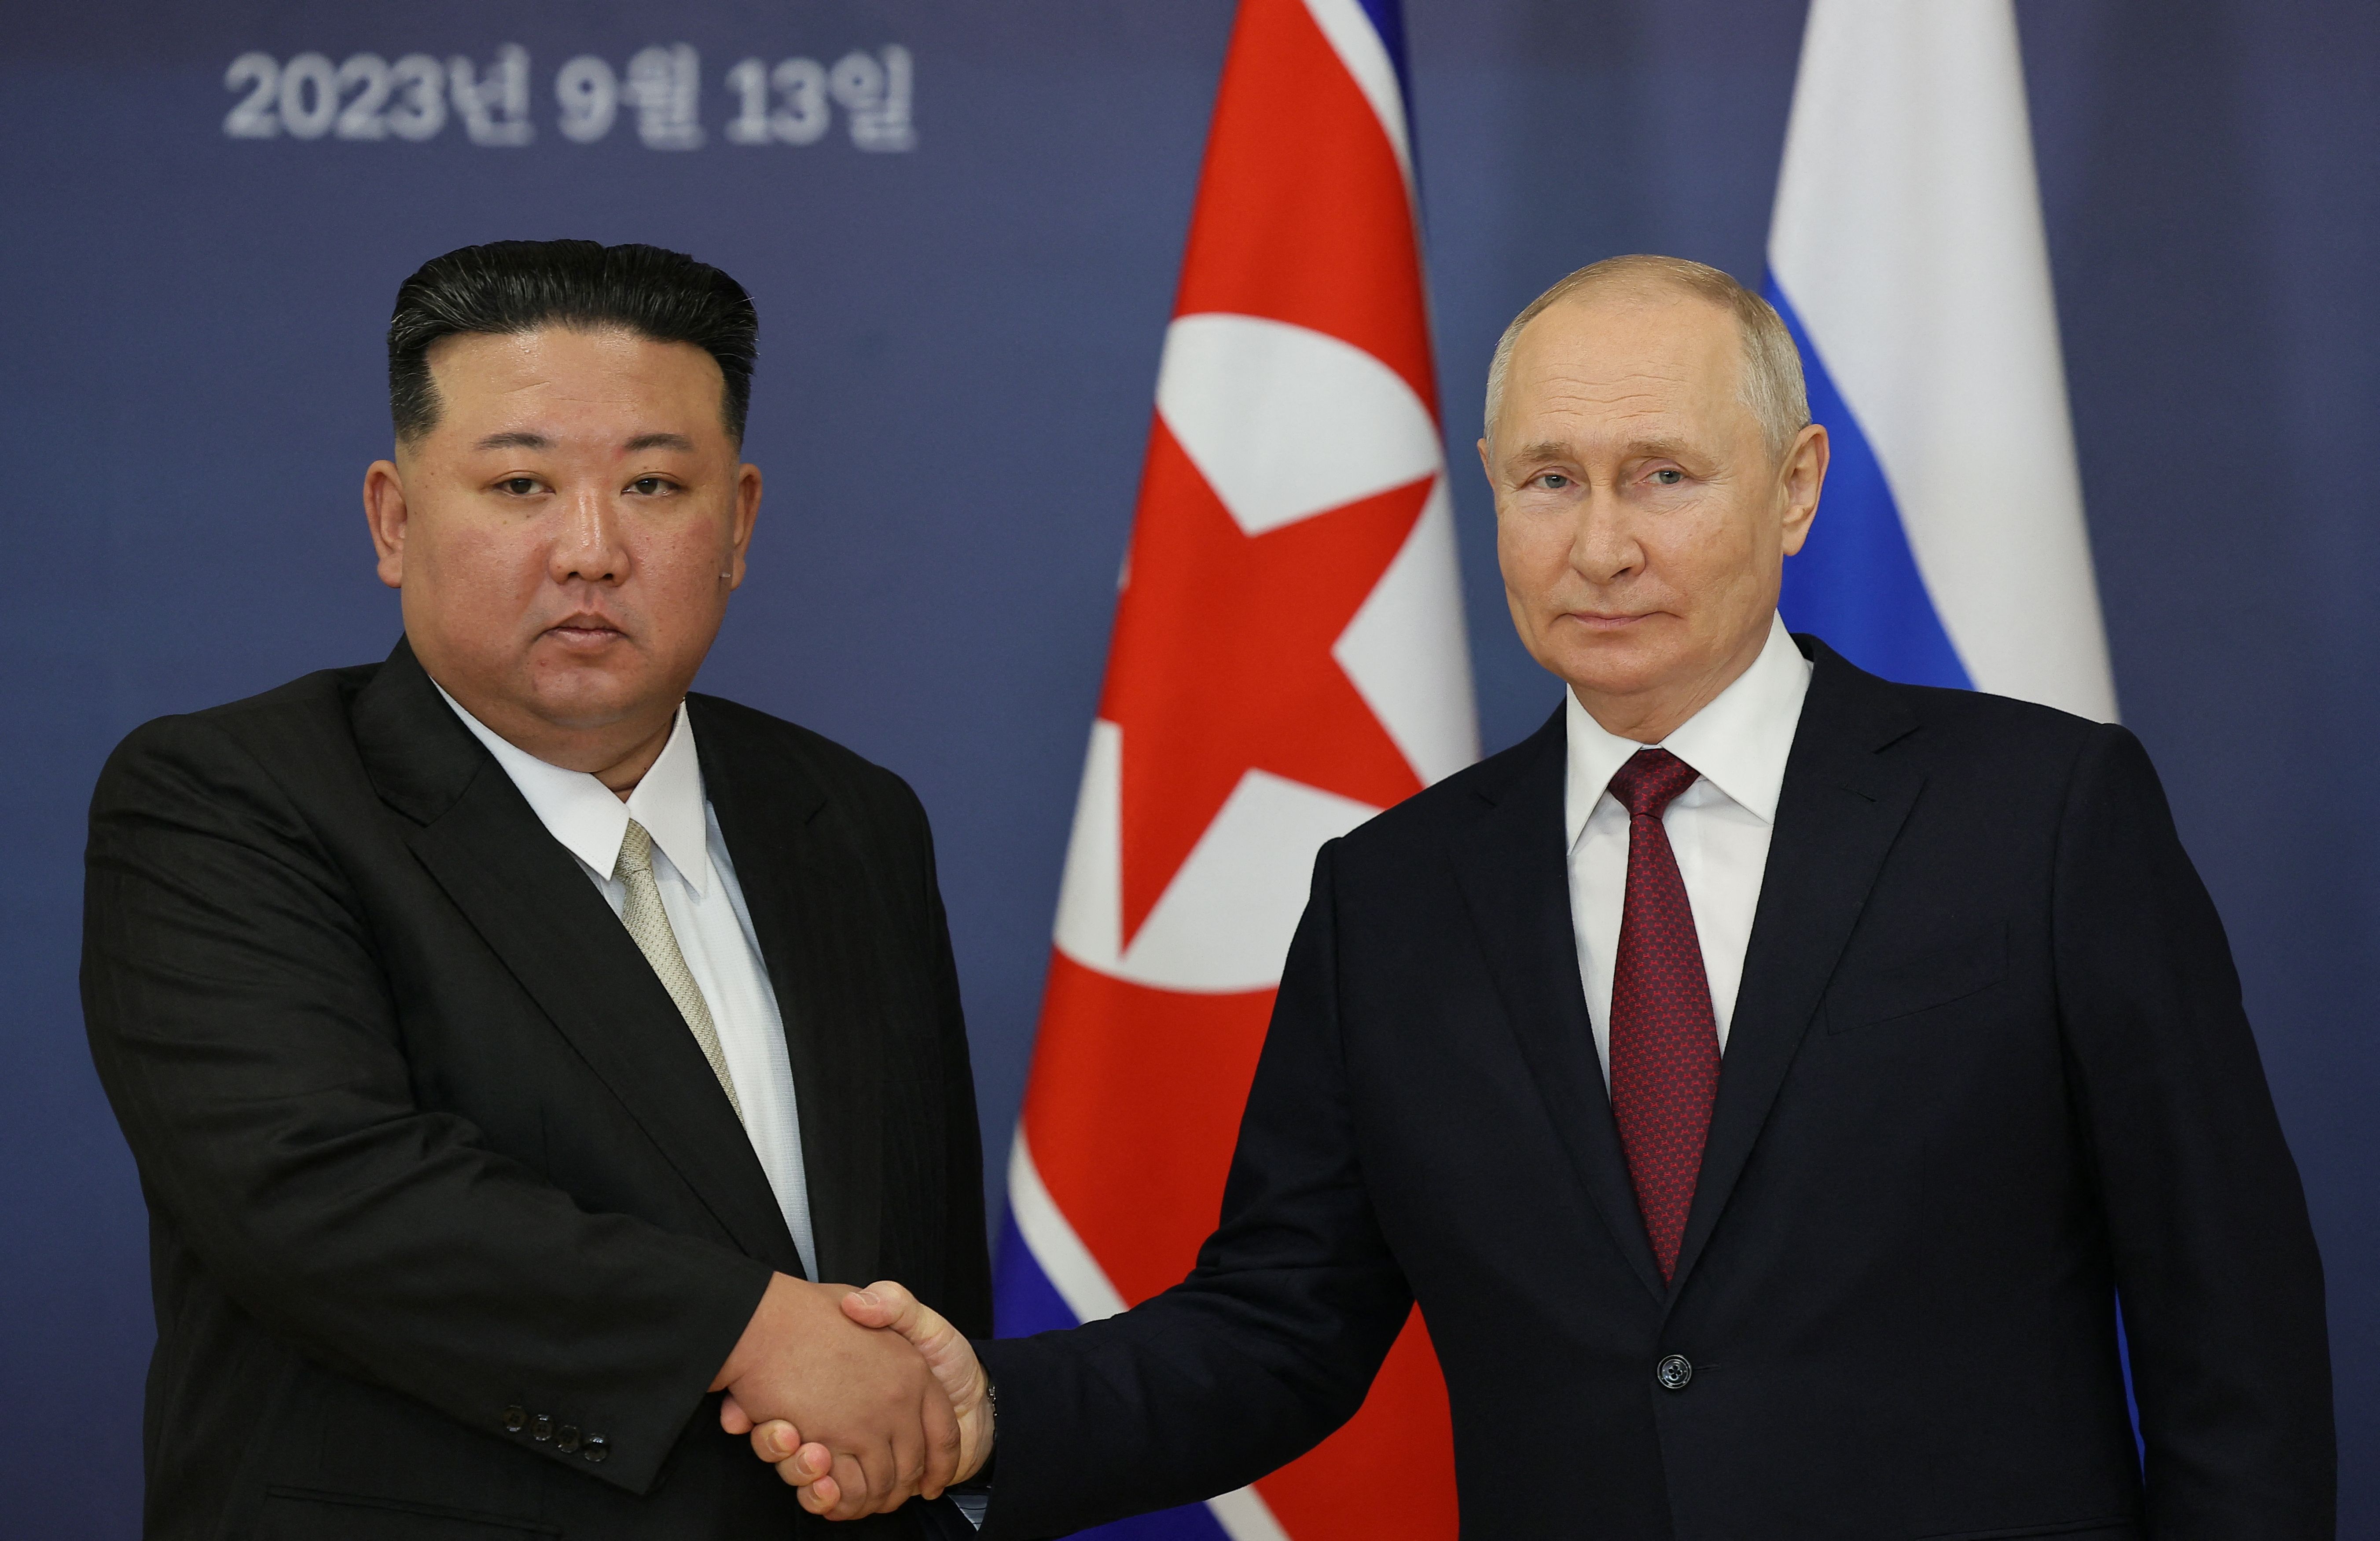 North Korea Says Putin May Visit Pyongyang After ‘Epoch-Making’ Talks With Kim in Russia